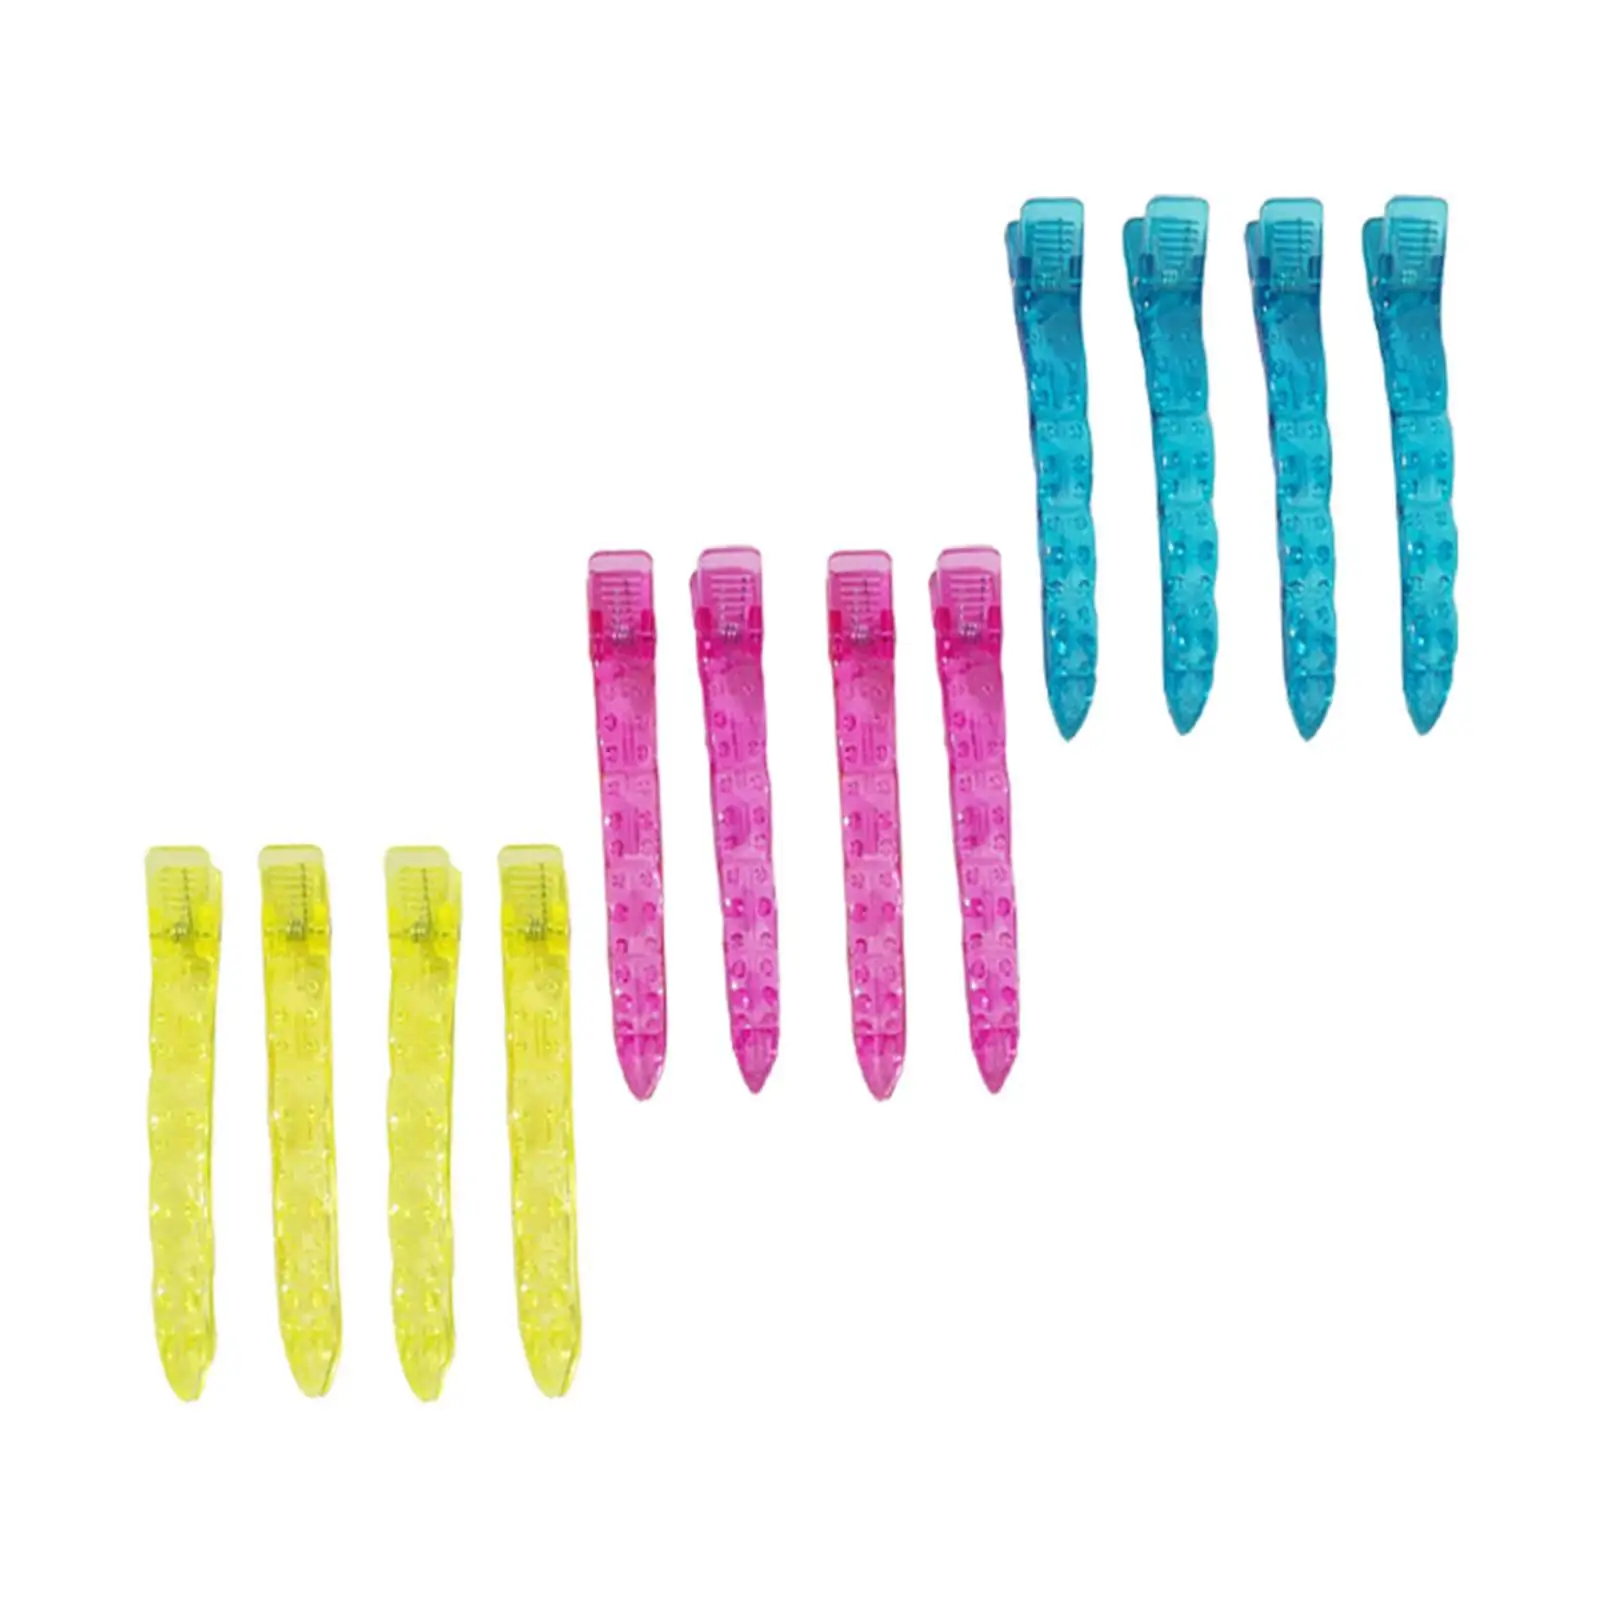 

12x Multicolored Sectioning Hair Clips Hair Accessories Professional Women Girls Hair Styling Clamps for Coloring Dyeing Working